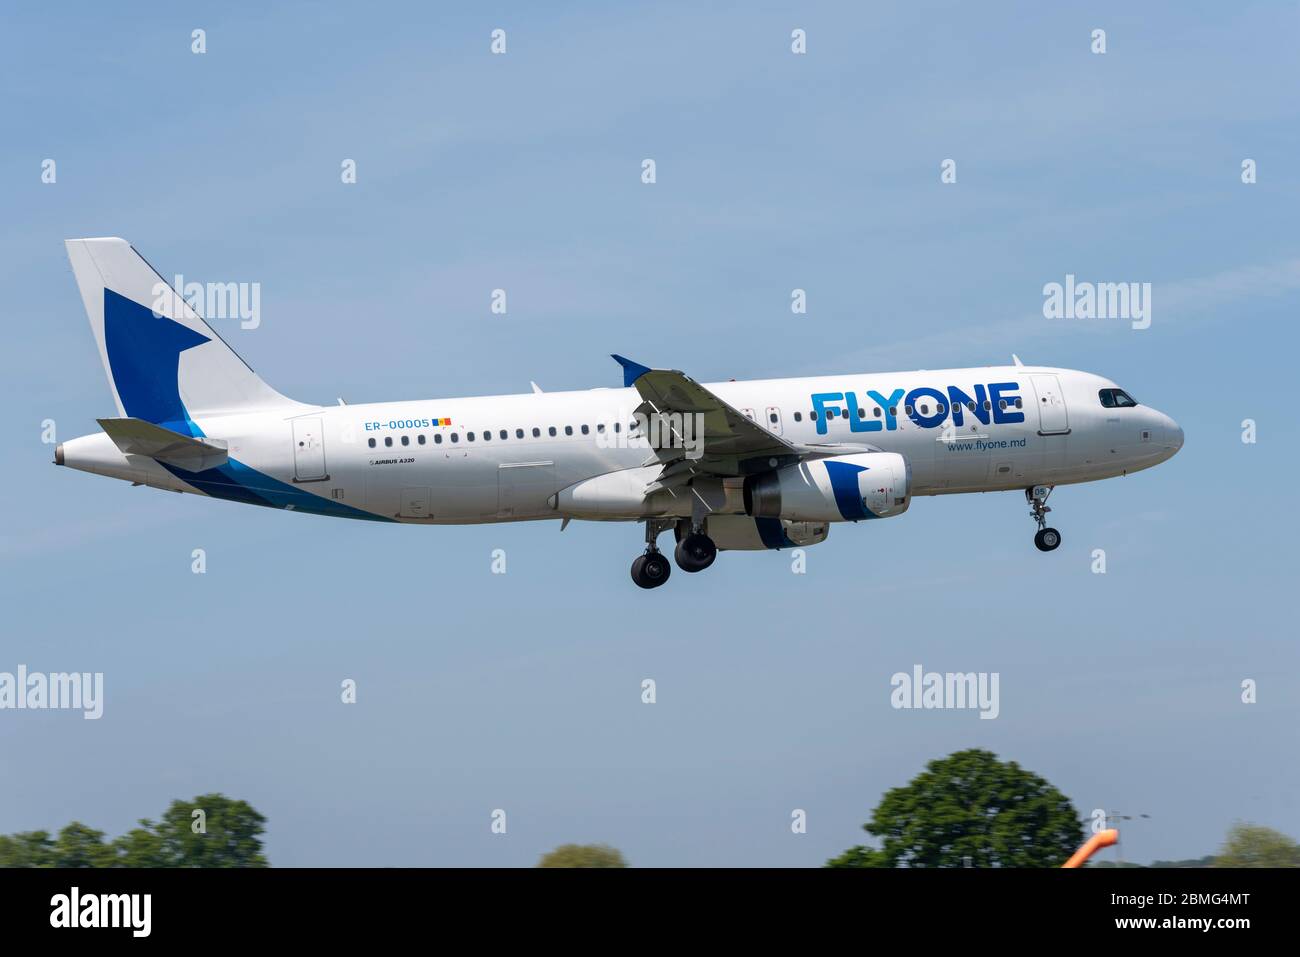 London Southend Airport, Essex, UK. 9th May, 2020. A FlyOne repatriation flight has landed at London Southend Airport from Chisinau, Moldova, prior to the UK government's planned 14-day quarantine ruling due to the COVID-19 Coronavirus lockdown. The FlyOne Airbus A320 aircraft serving the flight number FIA617 can carry 180 passengers when full, and landed at 2pm. Southend Airport have stated that all precautions are being taken in line with current government guidance Stock Photo